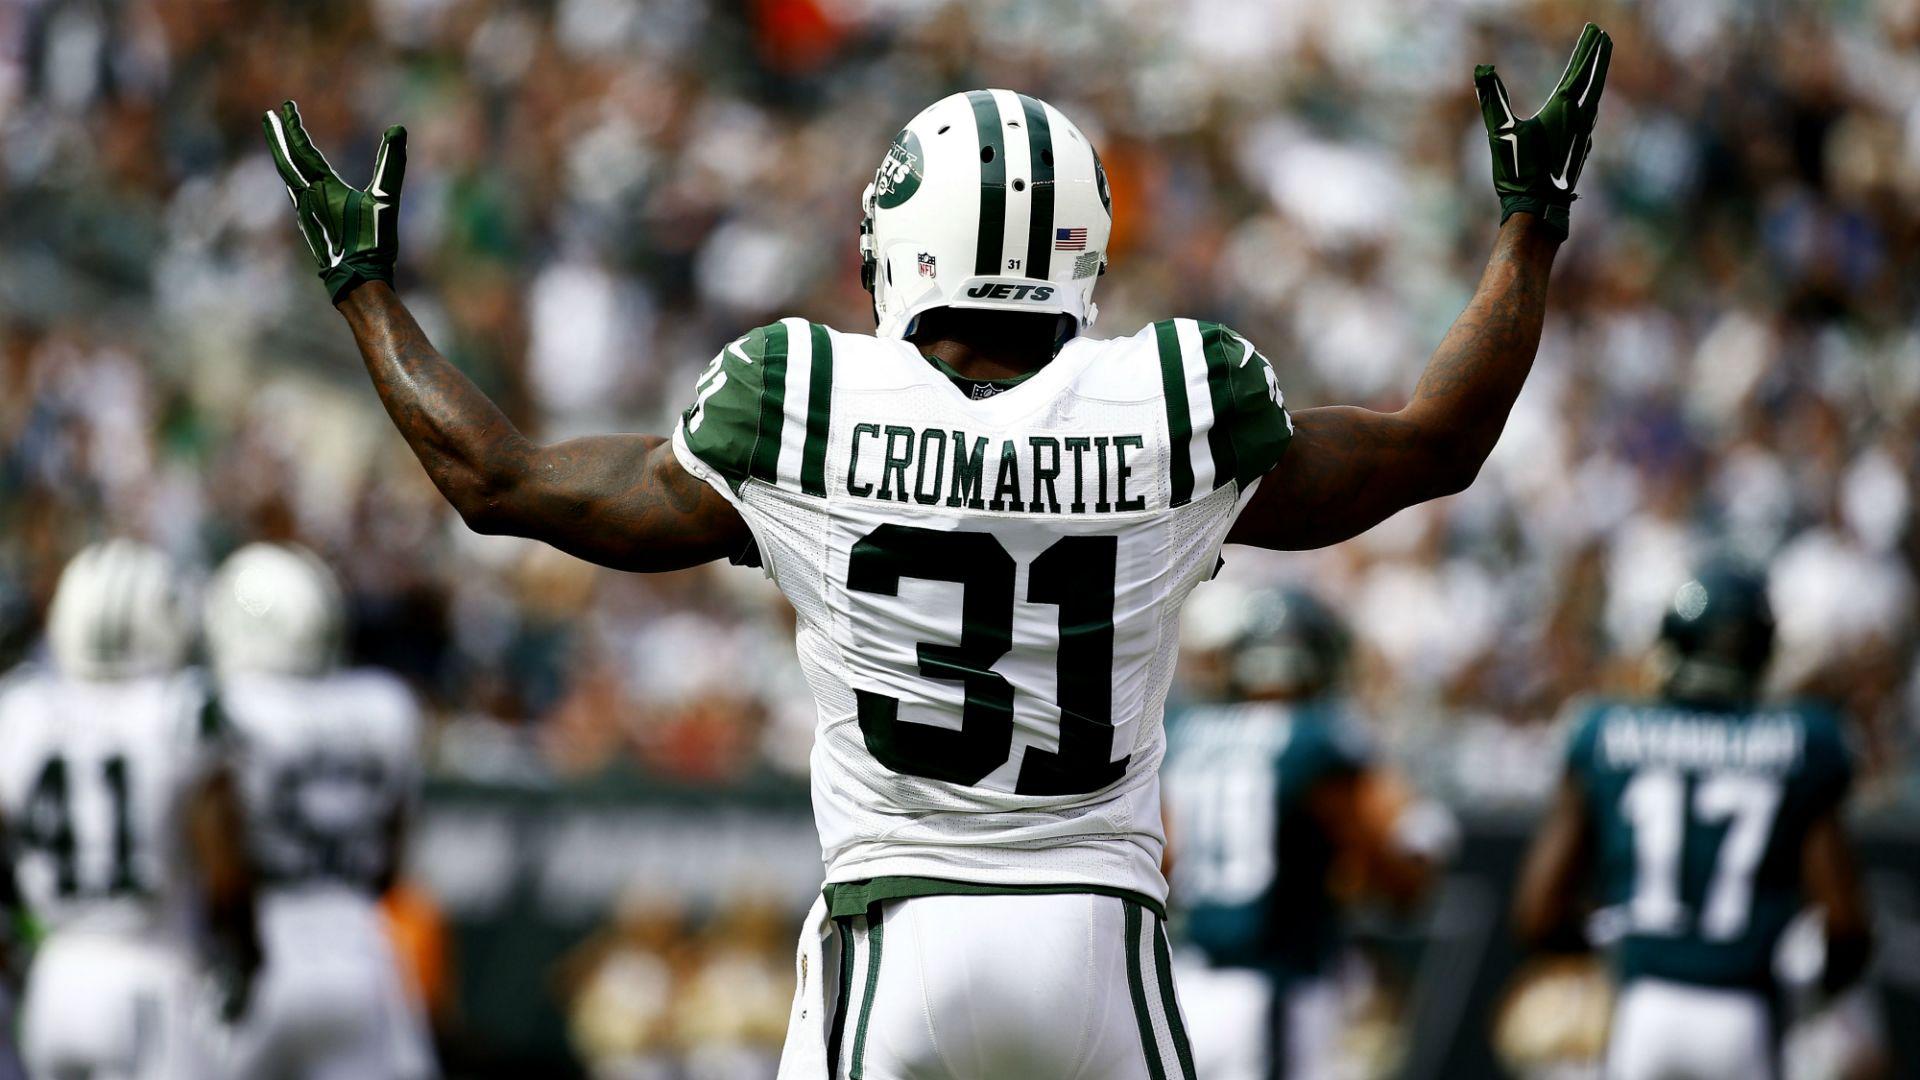 Antonio Cromartie, wife have twins, making it 12 kids for former